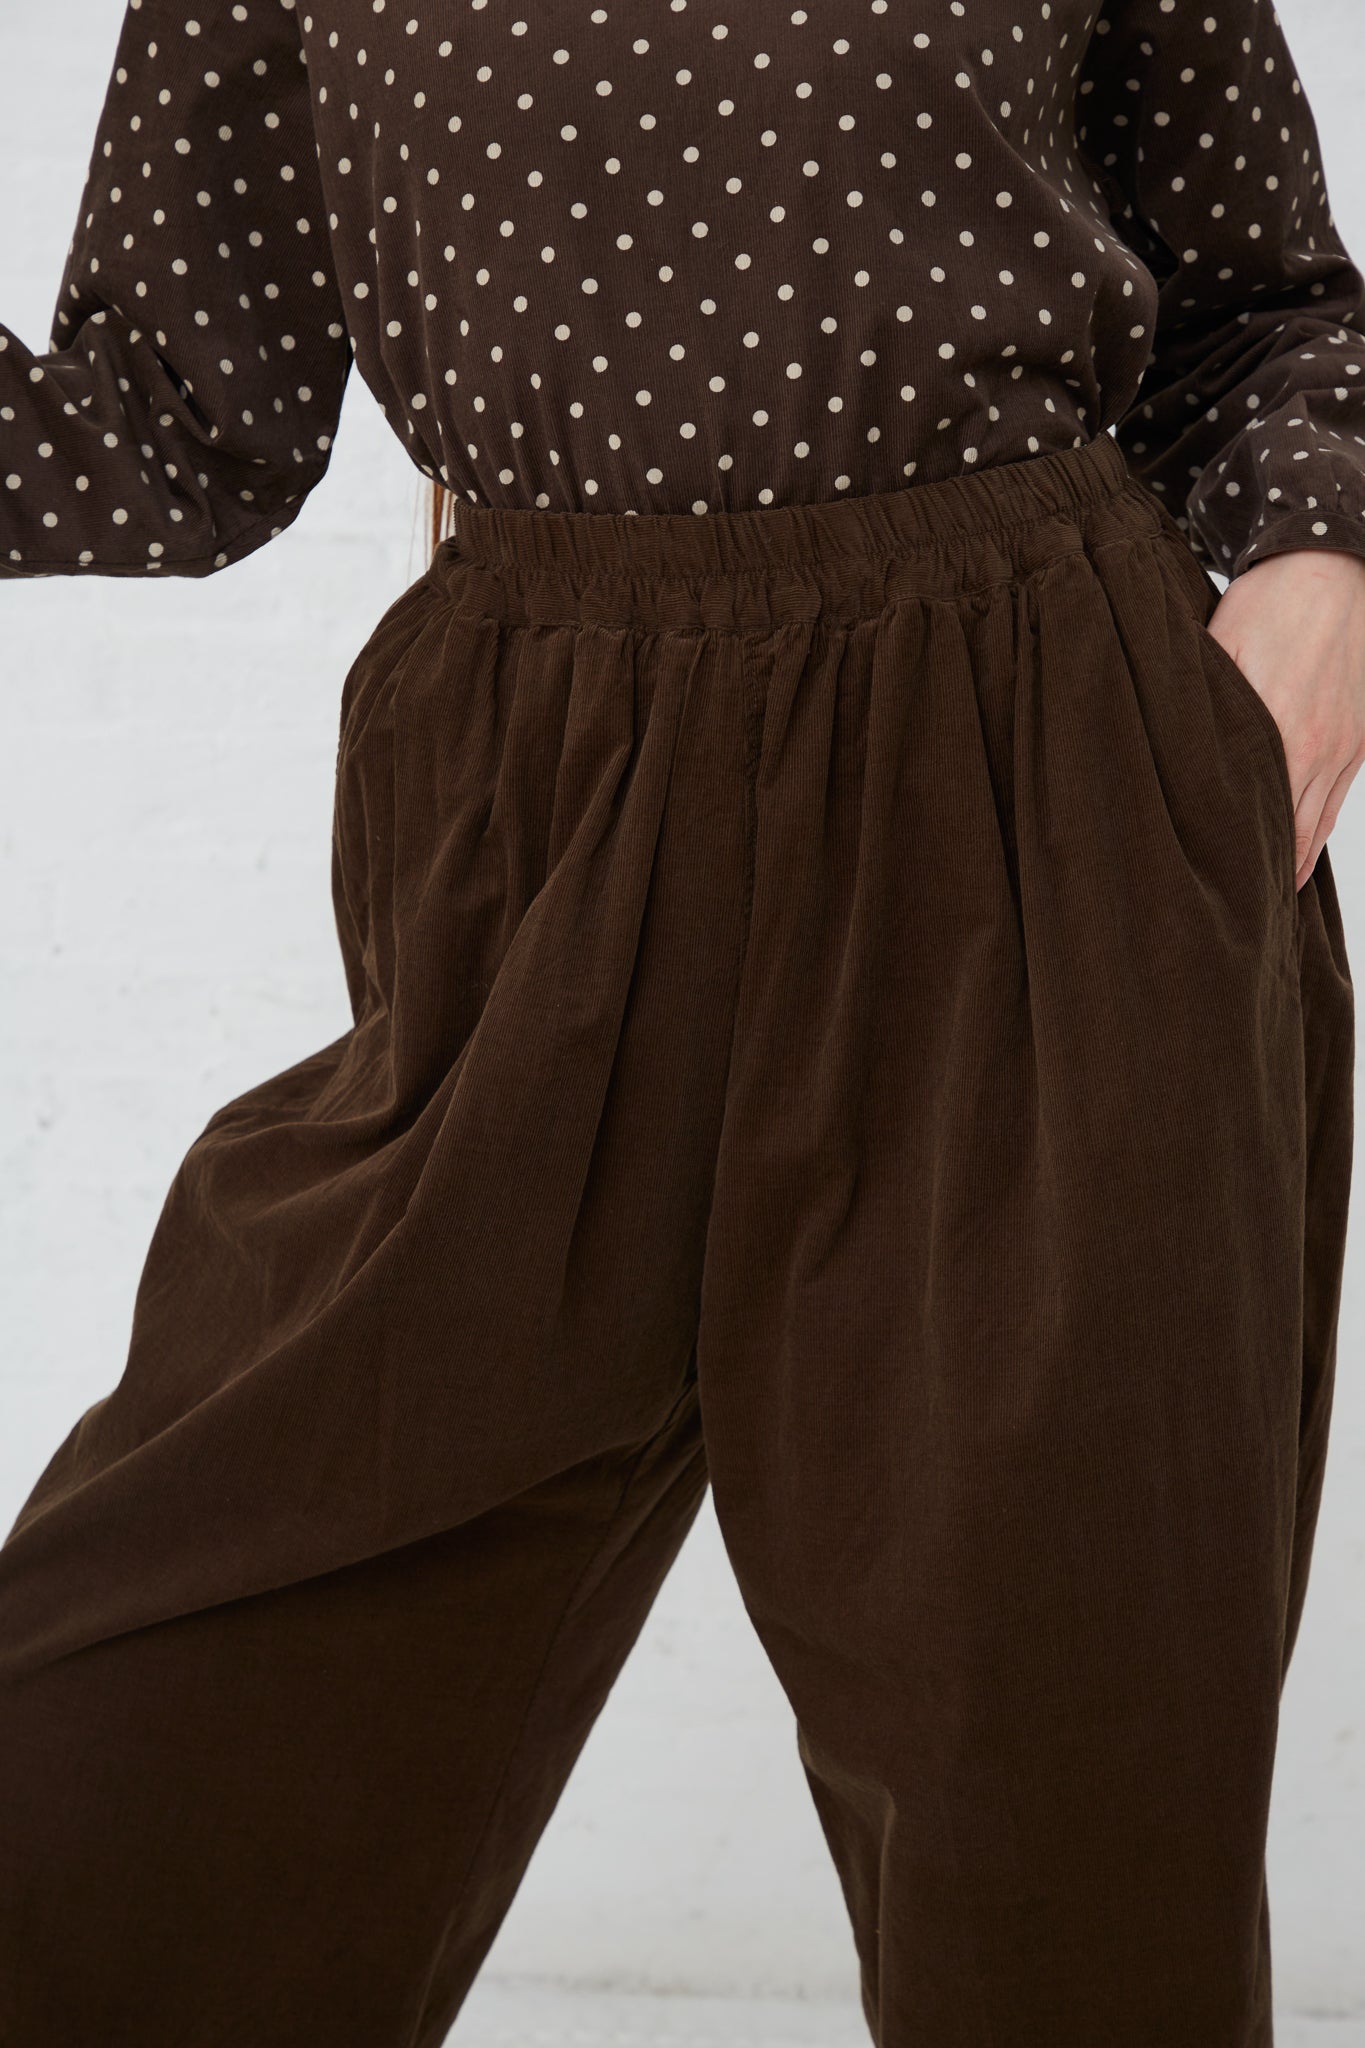 A woman wearing Ichi's Cotton Pant in Brown, a relaxed fit made from crinkled cotton.